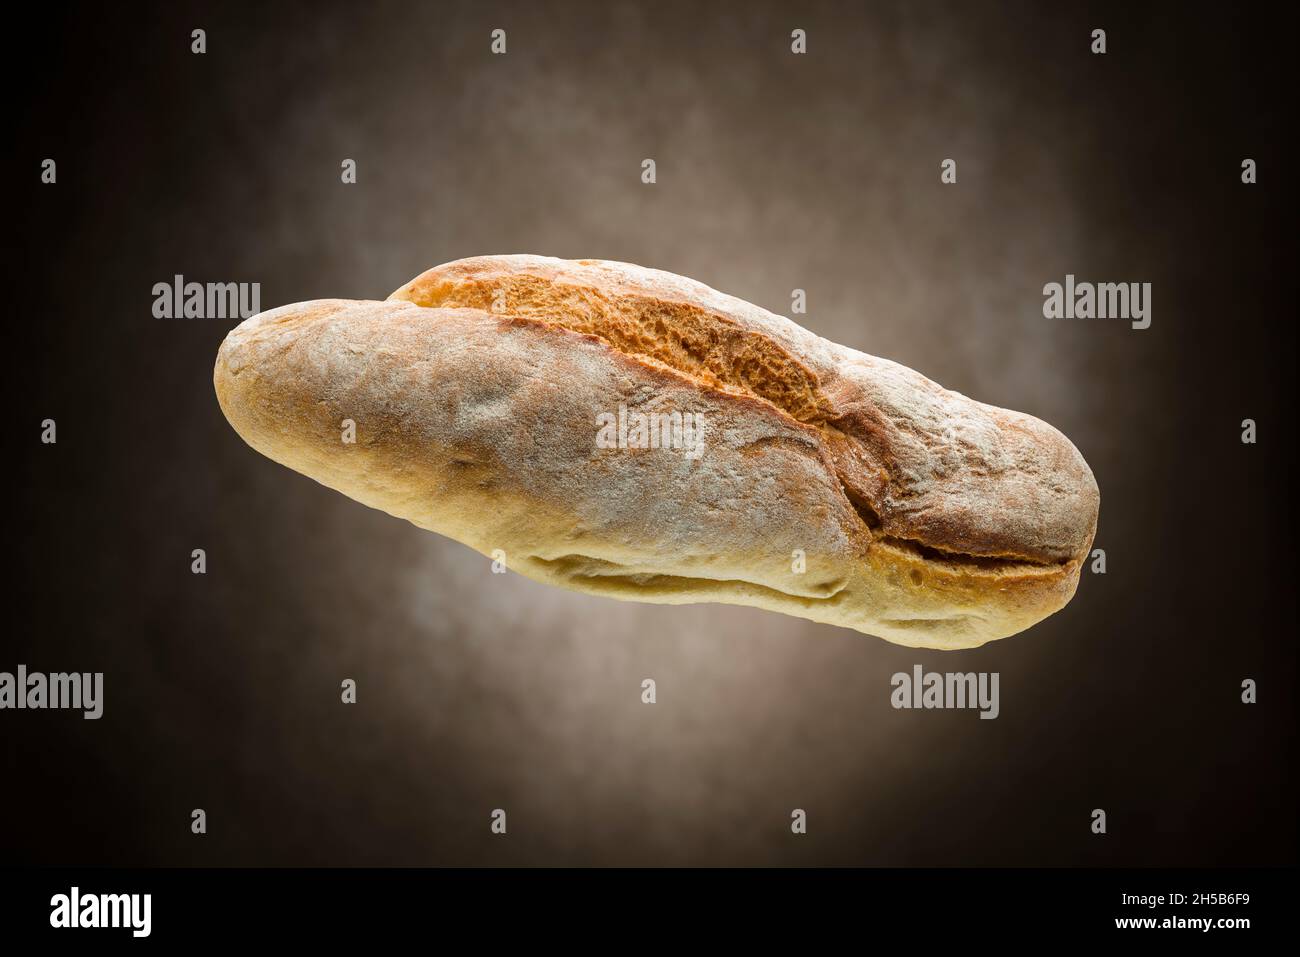 Fresh crunchy baked bread on brown background. Stock Photo